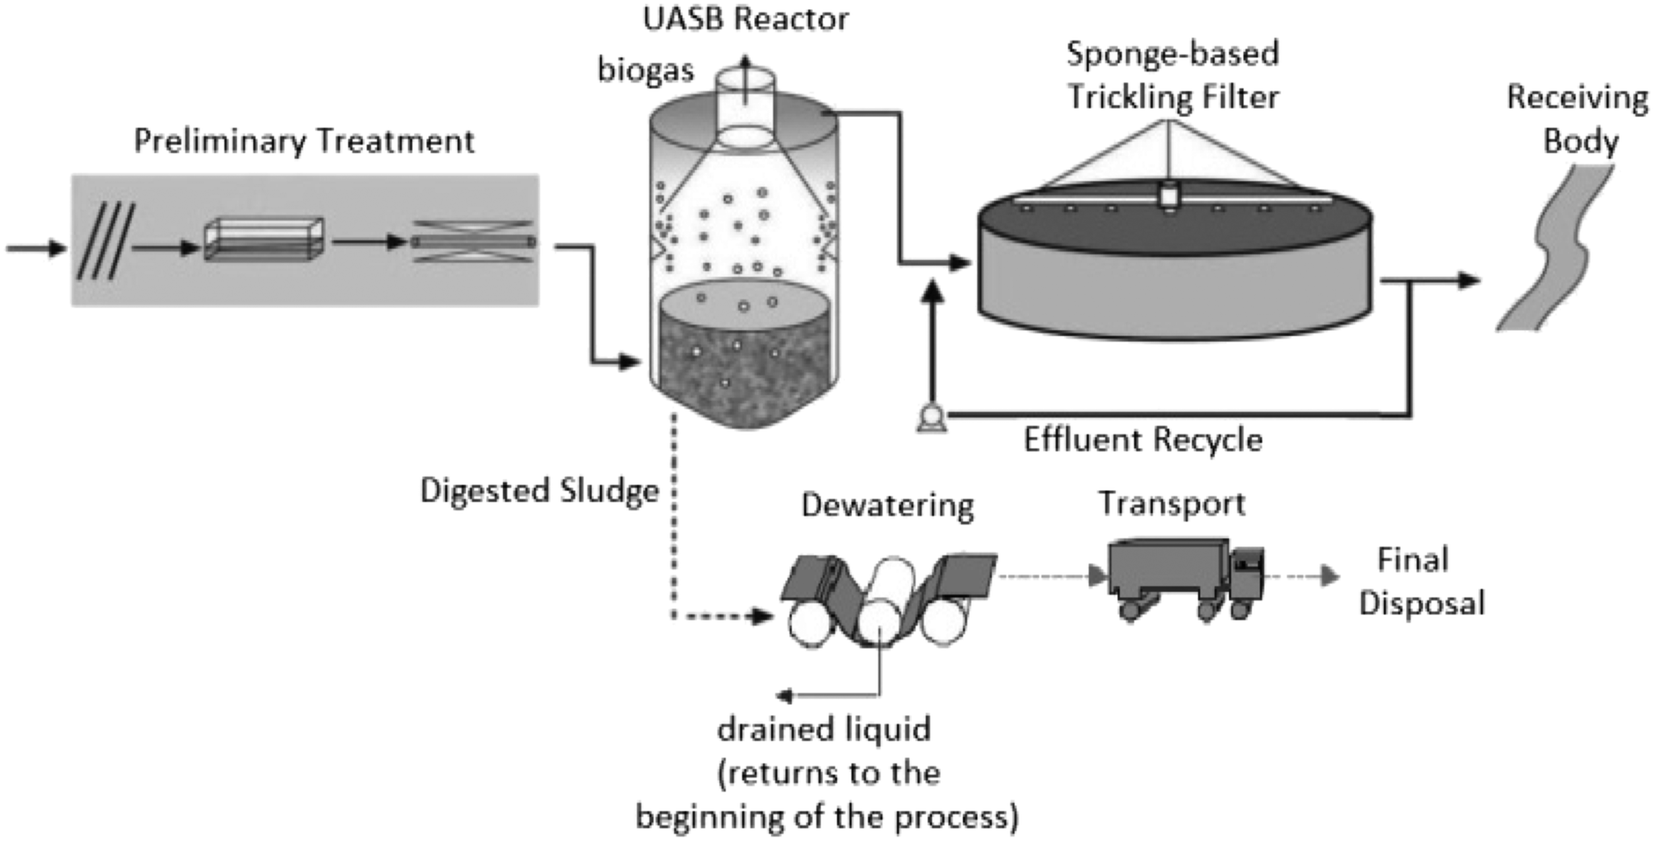 Trickling filters following anaerobic sewage treatment: state of the art  and perspectives - Environmental Science: Water Research & Technology (RSC  Publishing) DOI:10.1039/C8EW00330K